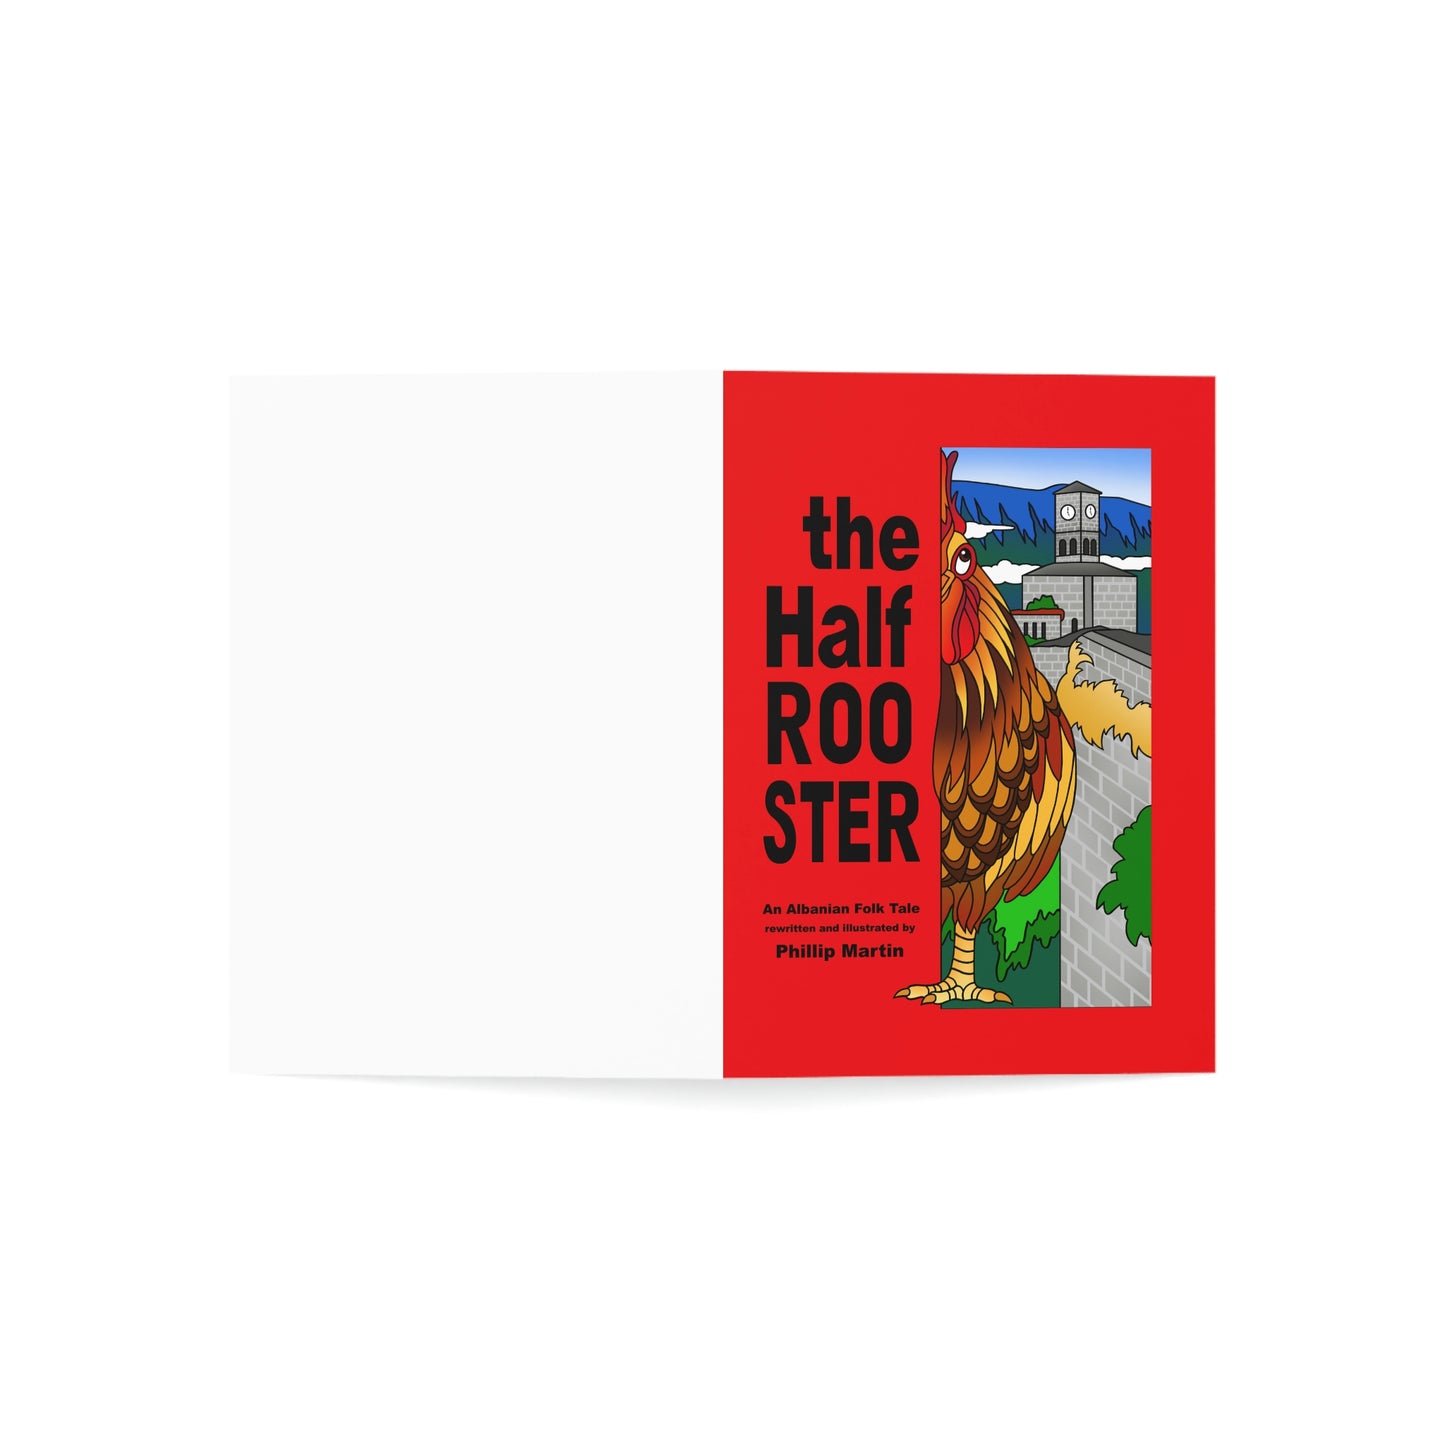 The Half Rooster Greeting Cards (1, 10, 30, and 50pcs)